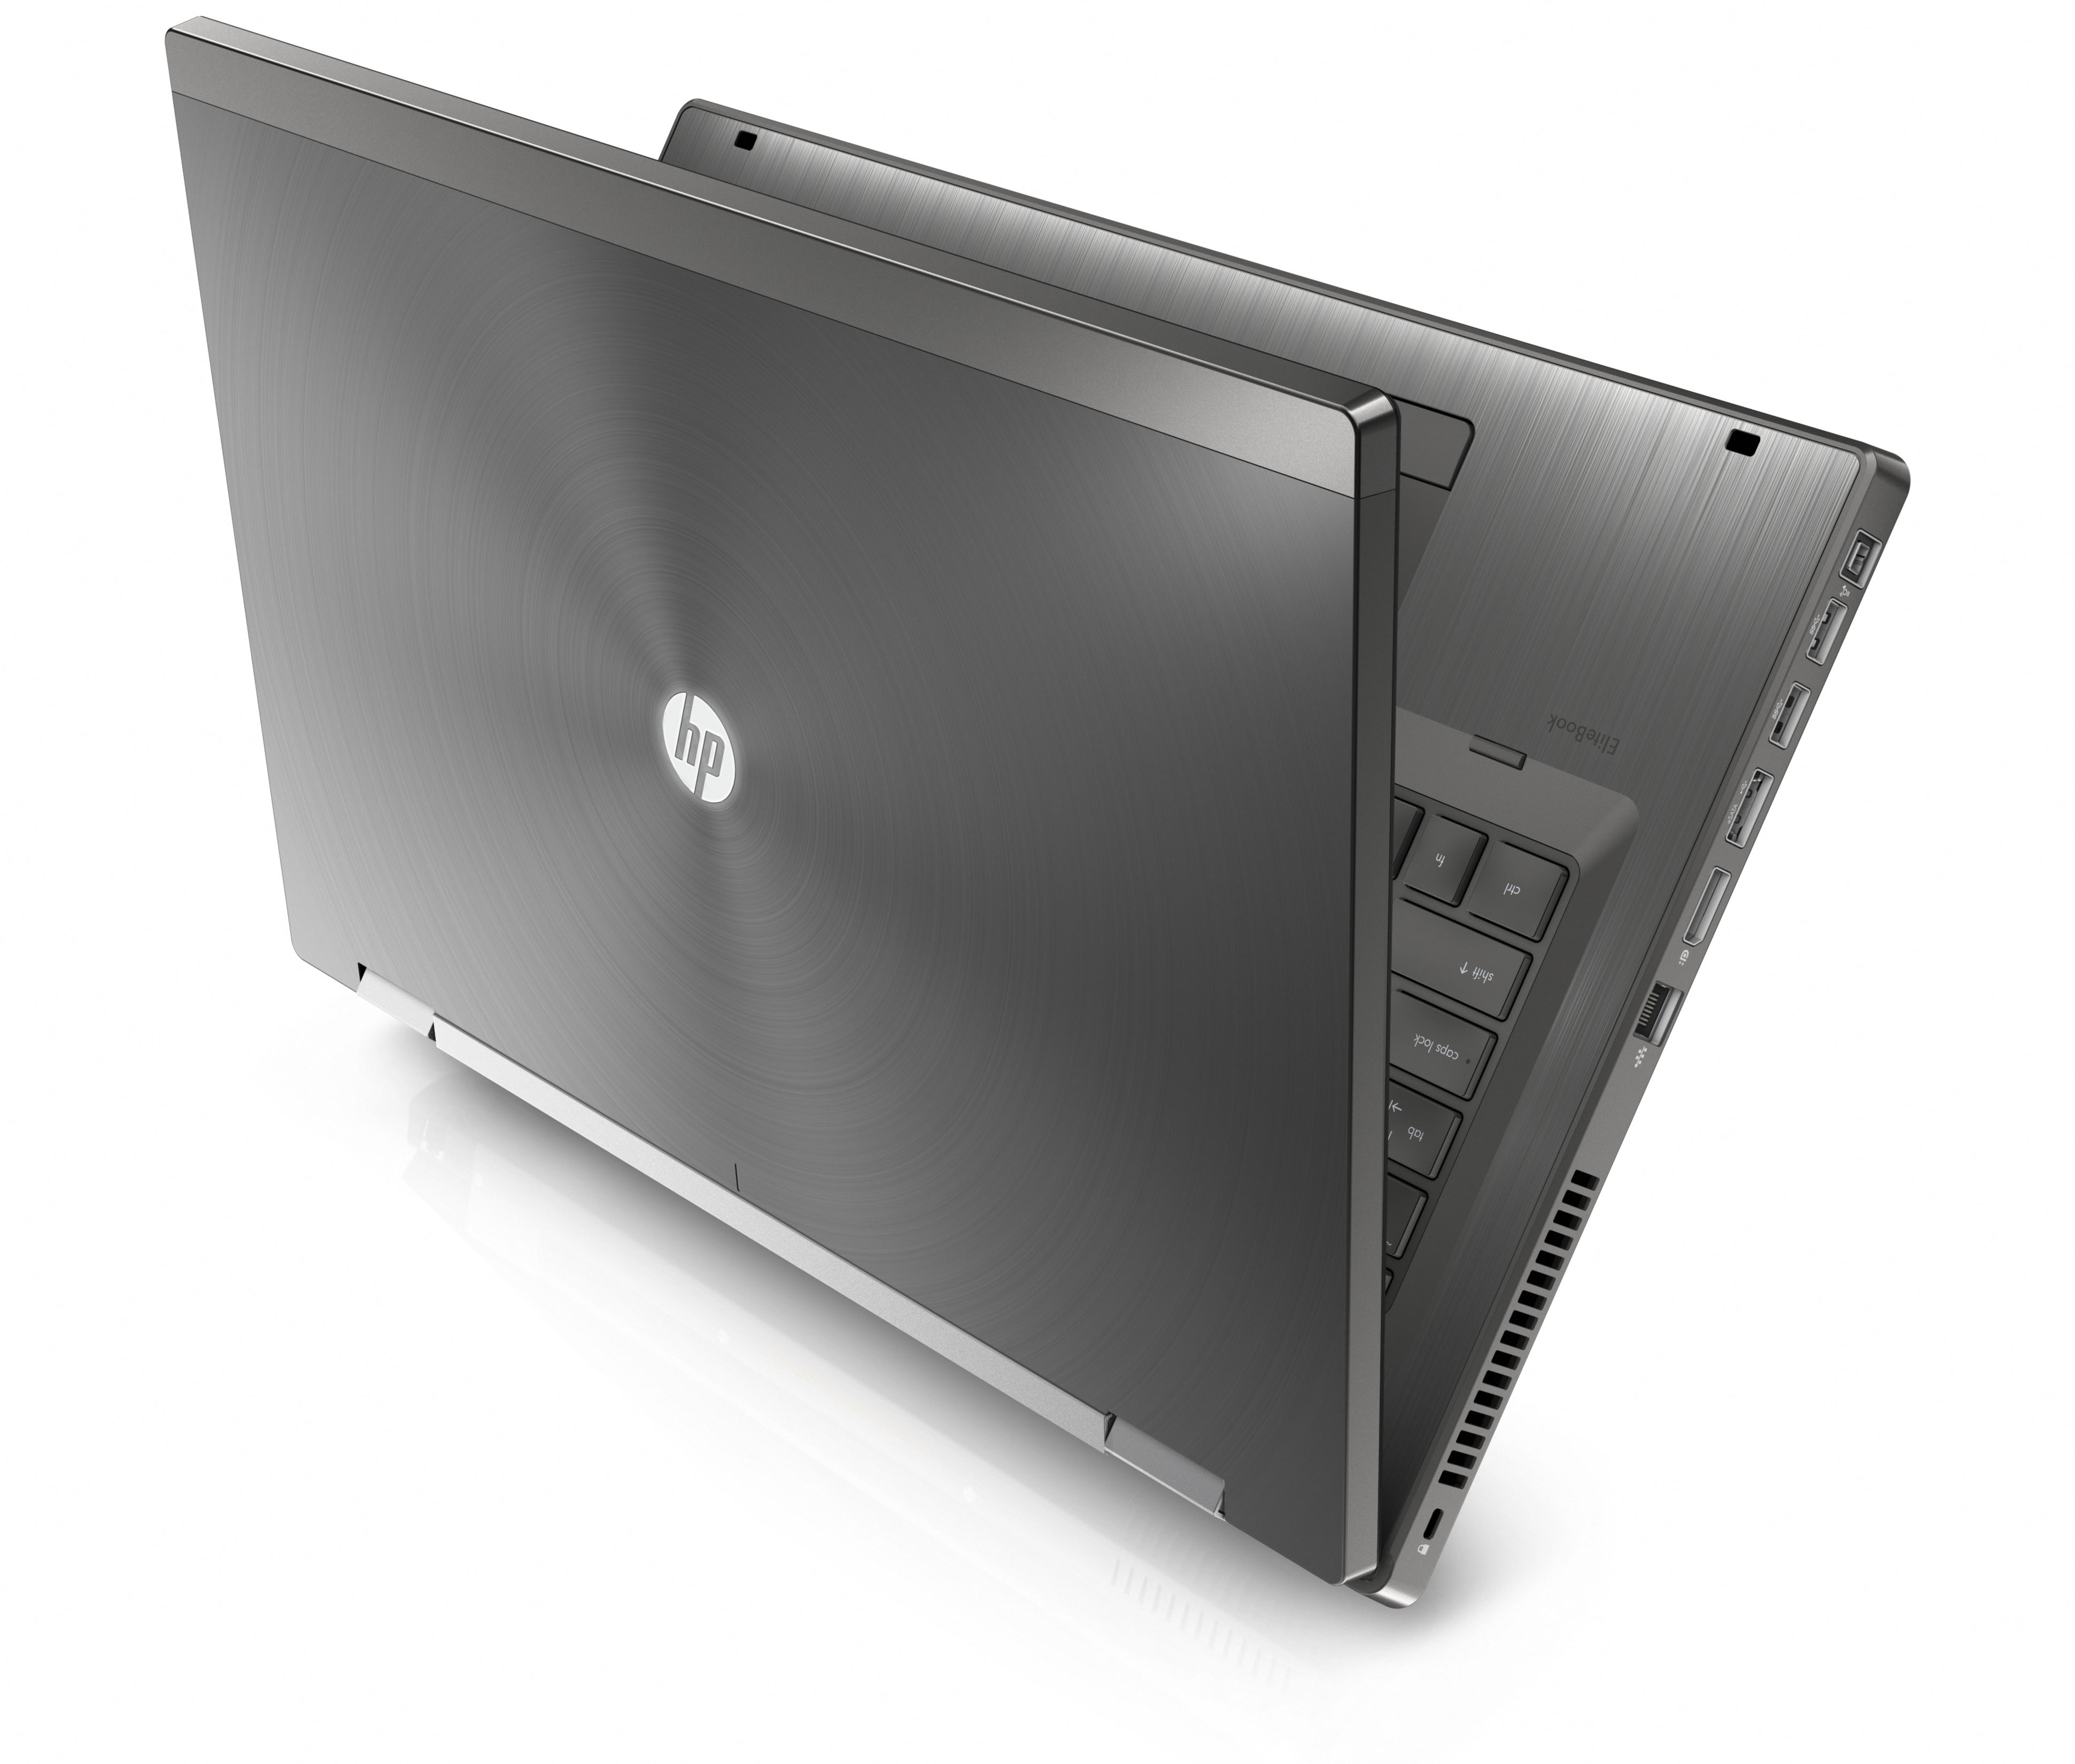 HP EliteBook 8760w Details, Specs and Pricing (Hands On